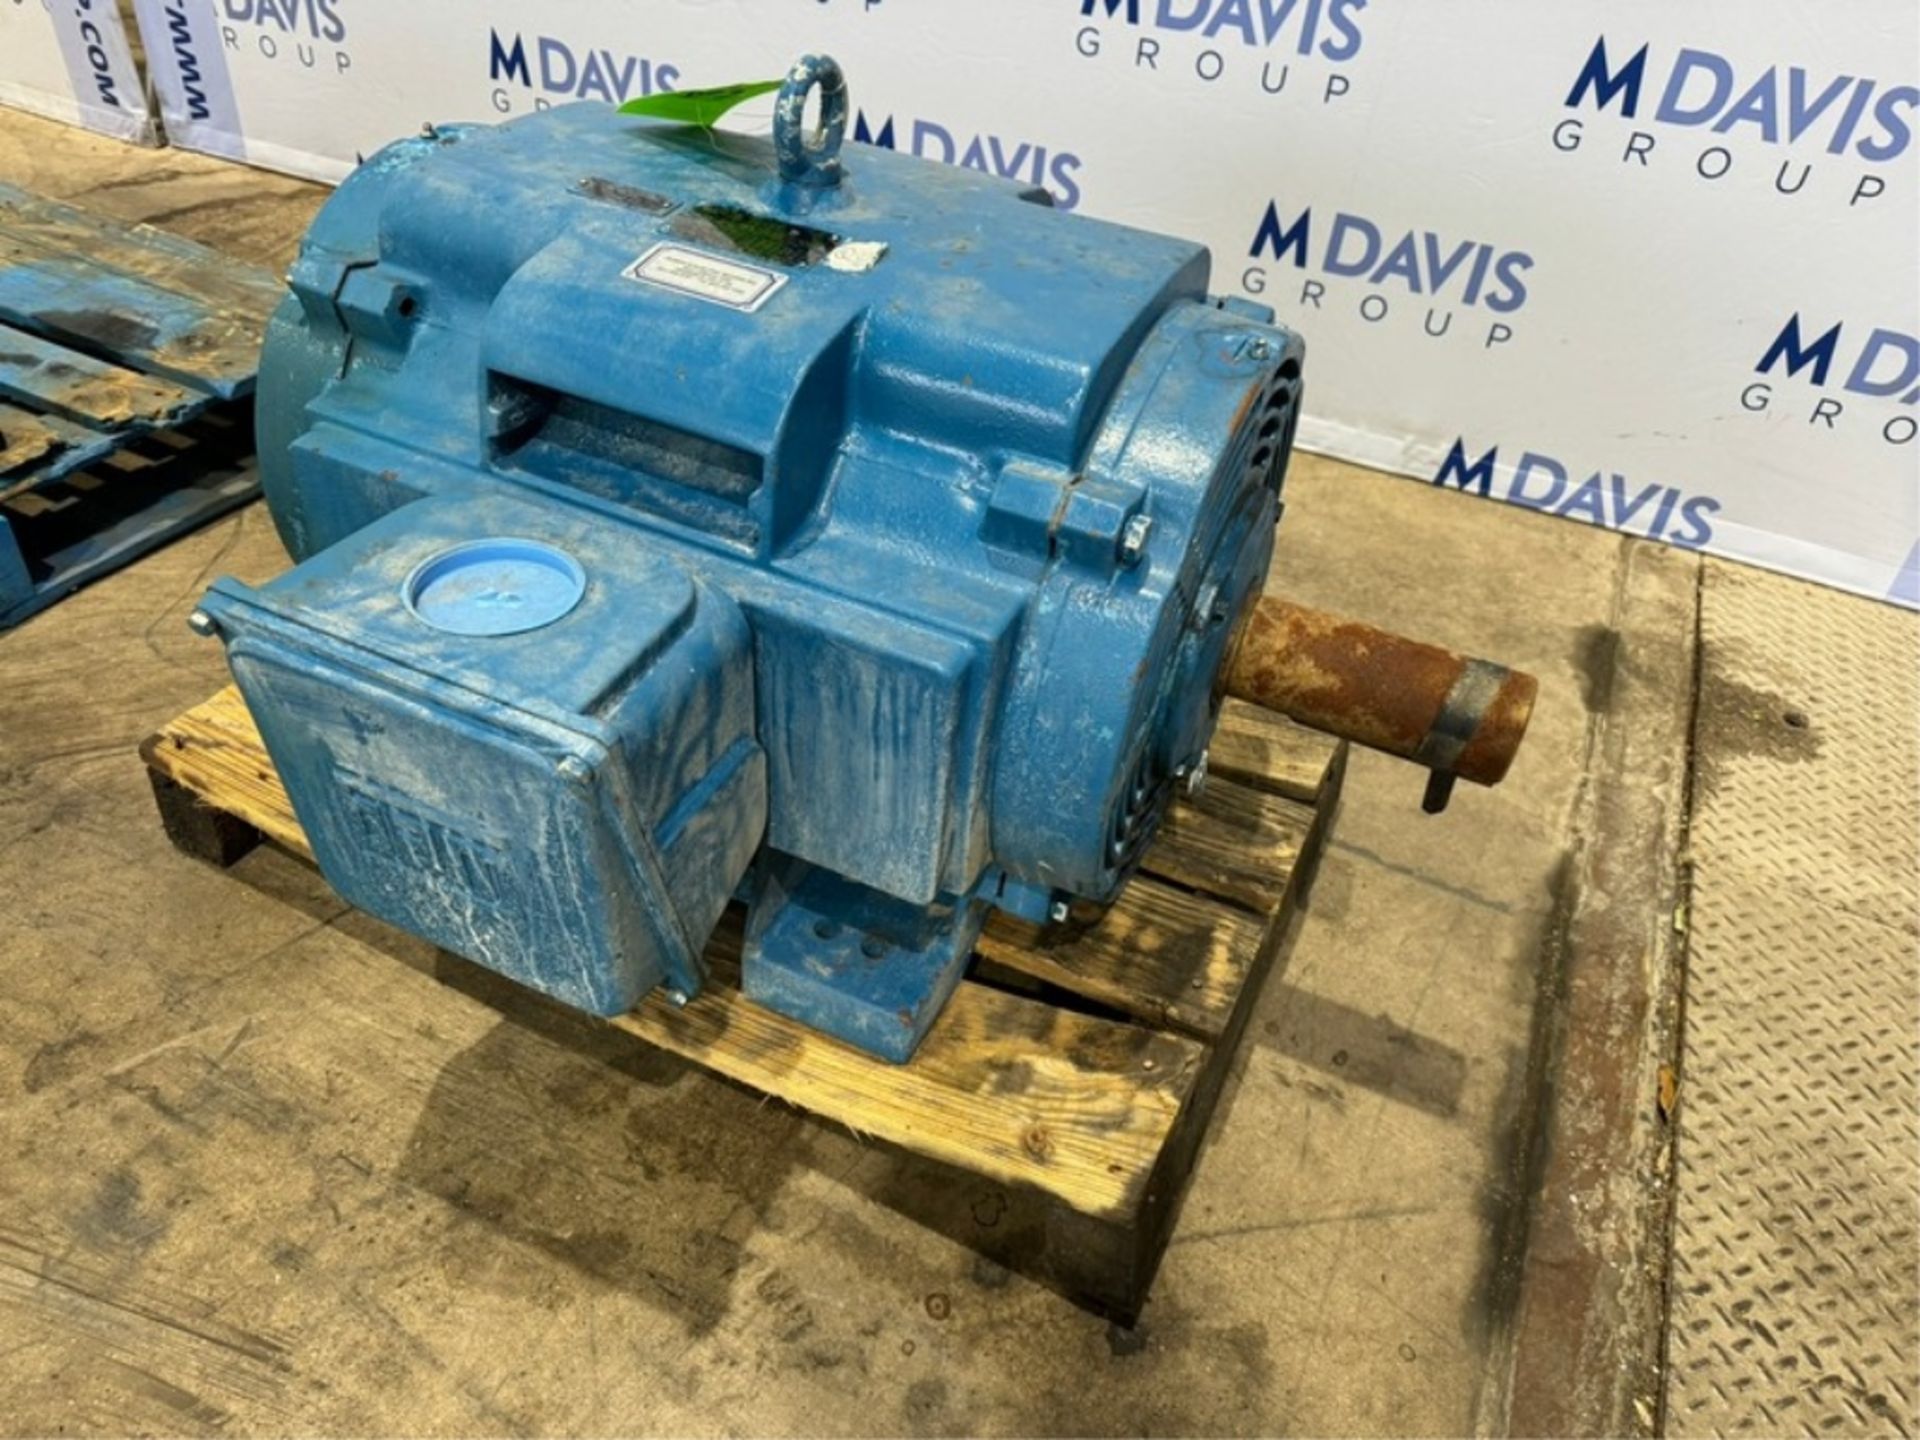 WEG 100 hp Motor, 208-230/460 Volts, 3 Phase, 1775 RPM (INV. #106521) (LOCATED MONROEVILLE, PA) (